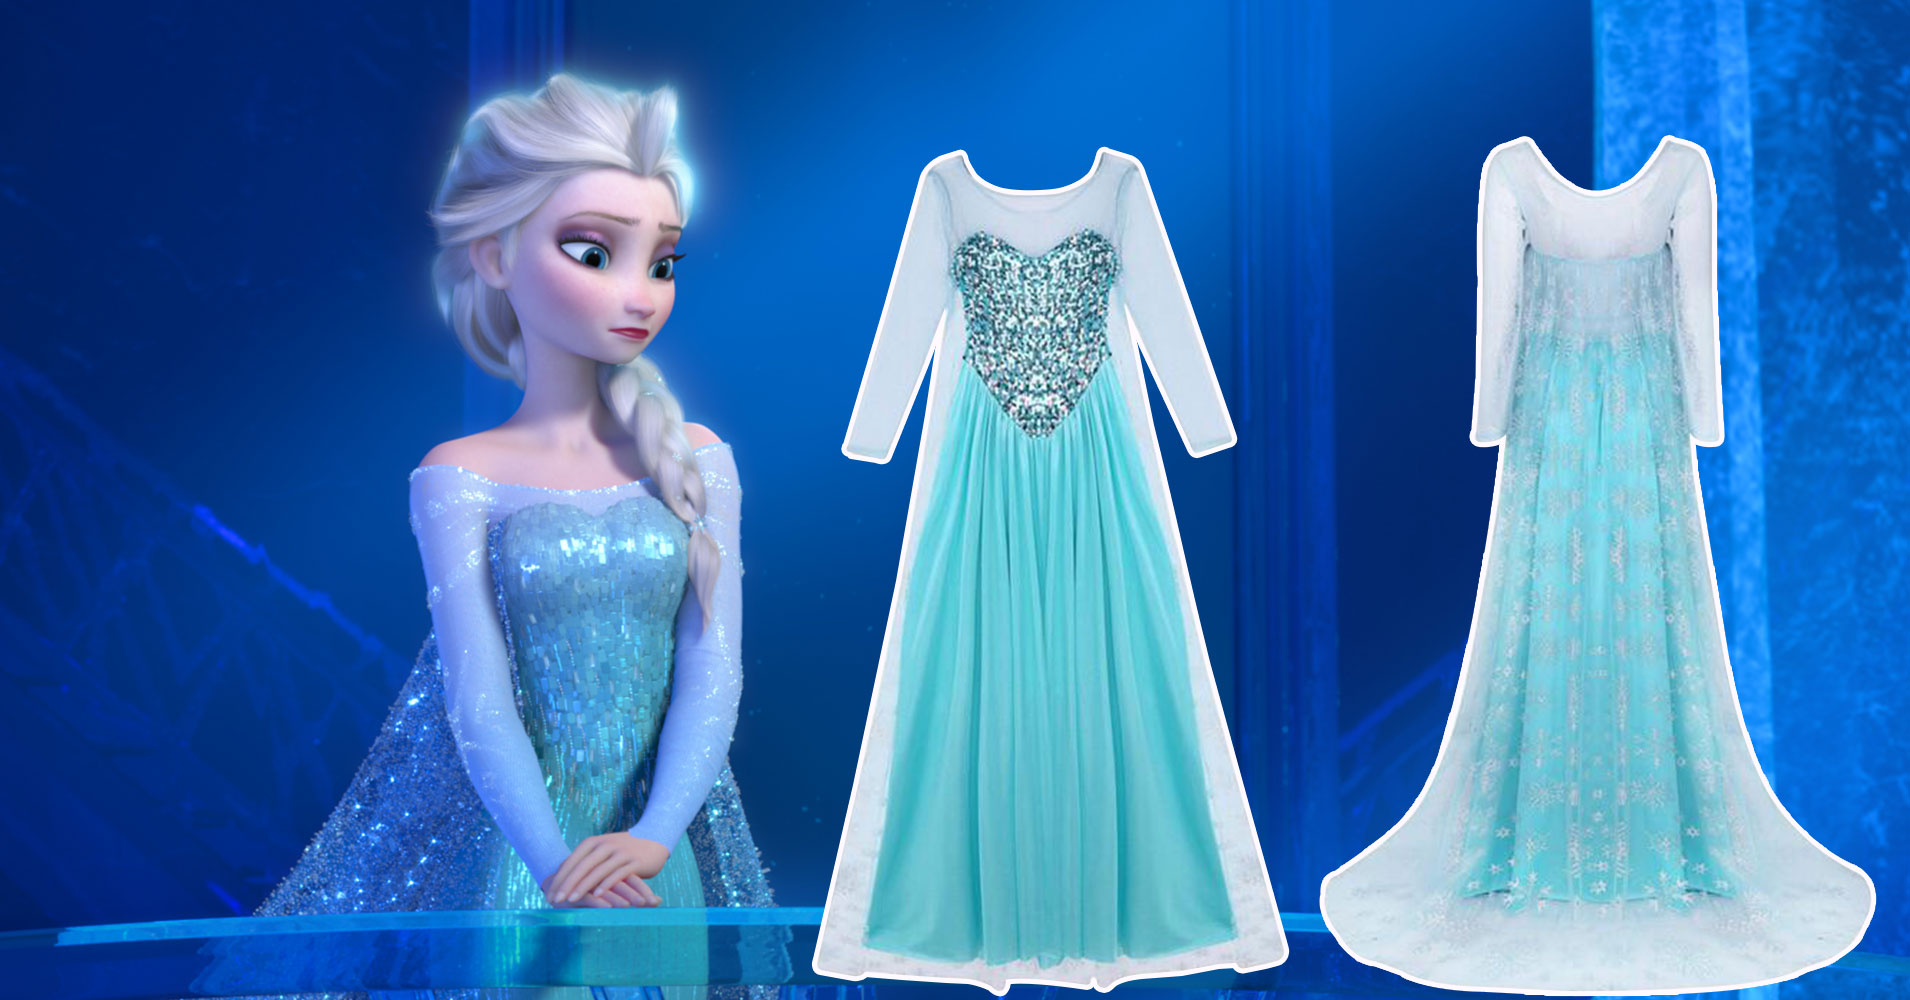 Disney Frozen 2 Princess Elsa Sparkly Party Cosplay Costume For Women